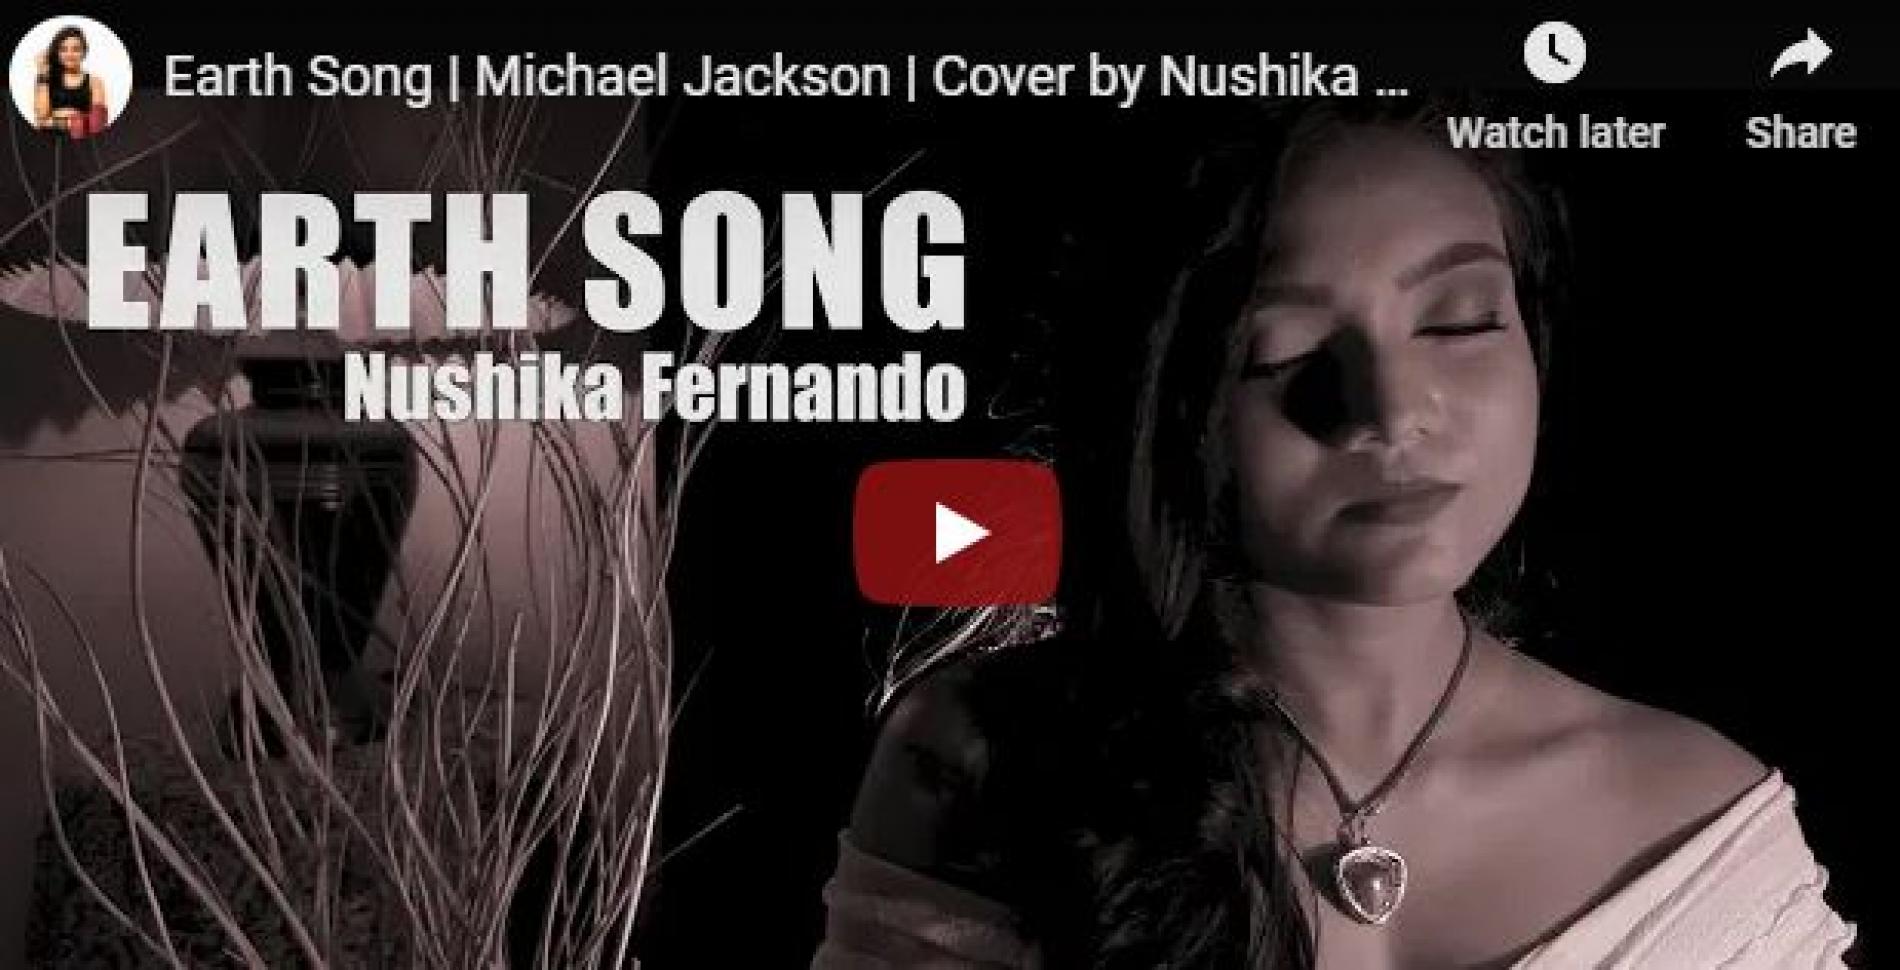 New Music : Earth Song | Michael Jackson | Cover by Nushika Fernando (2FORTY2)